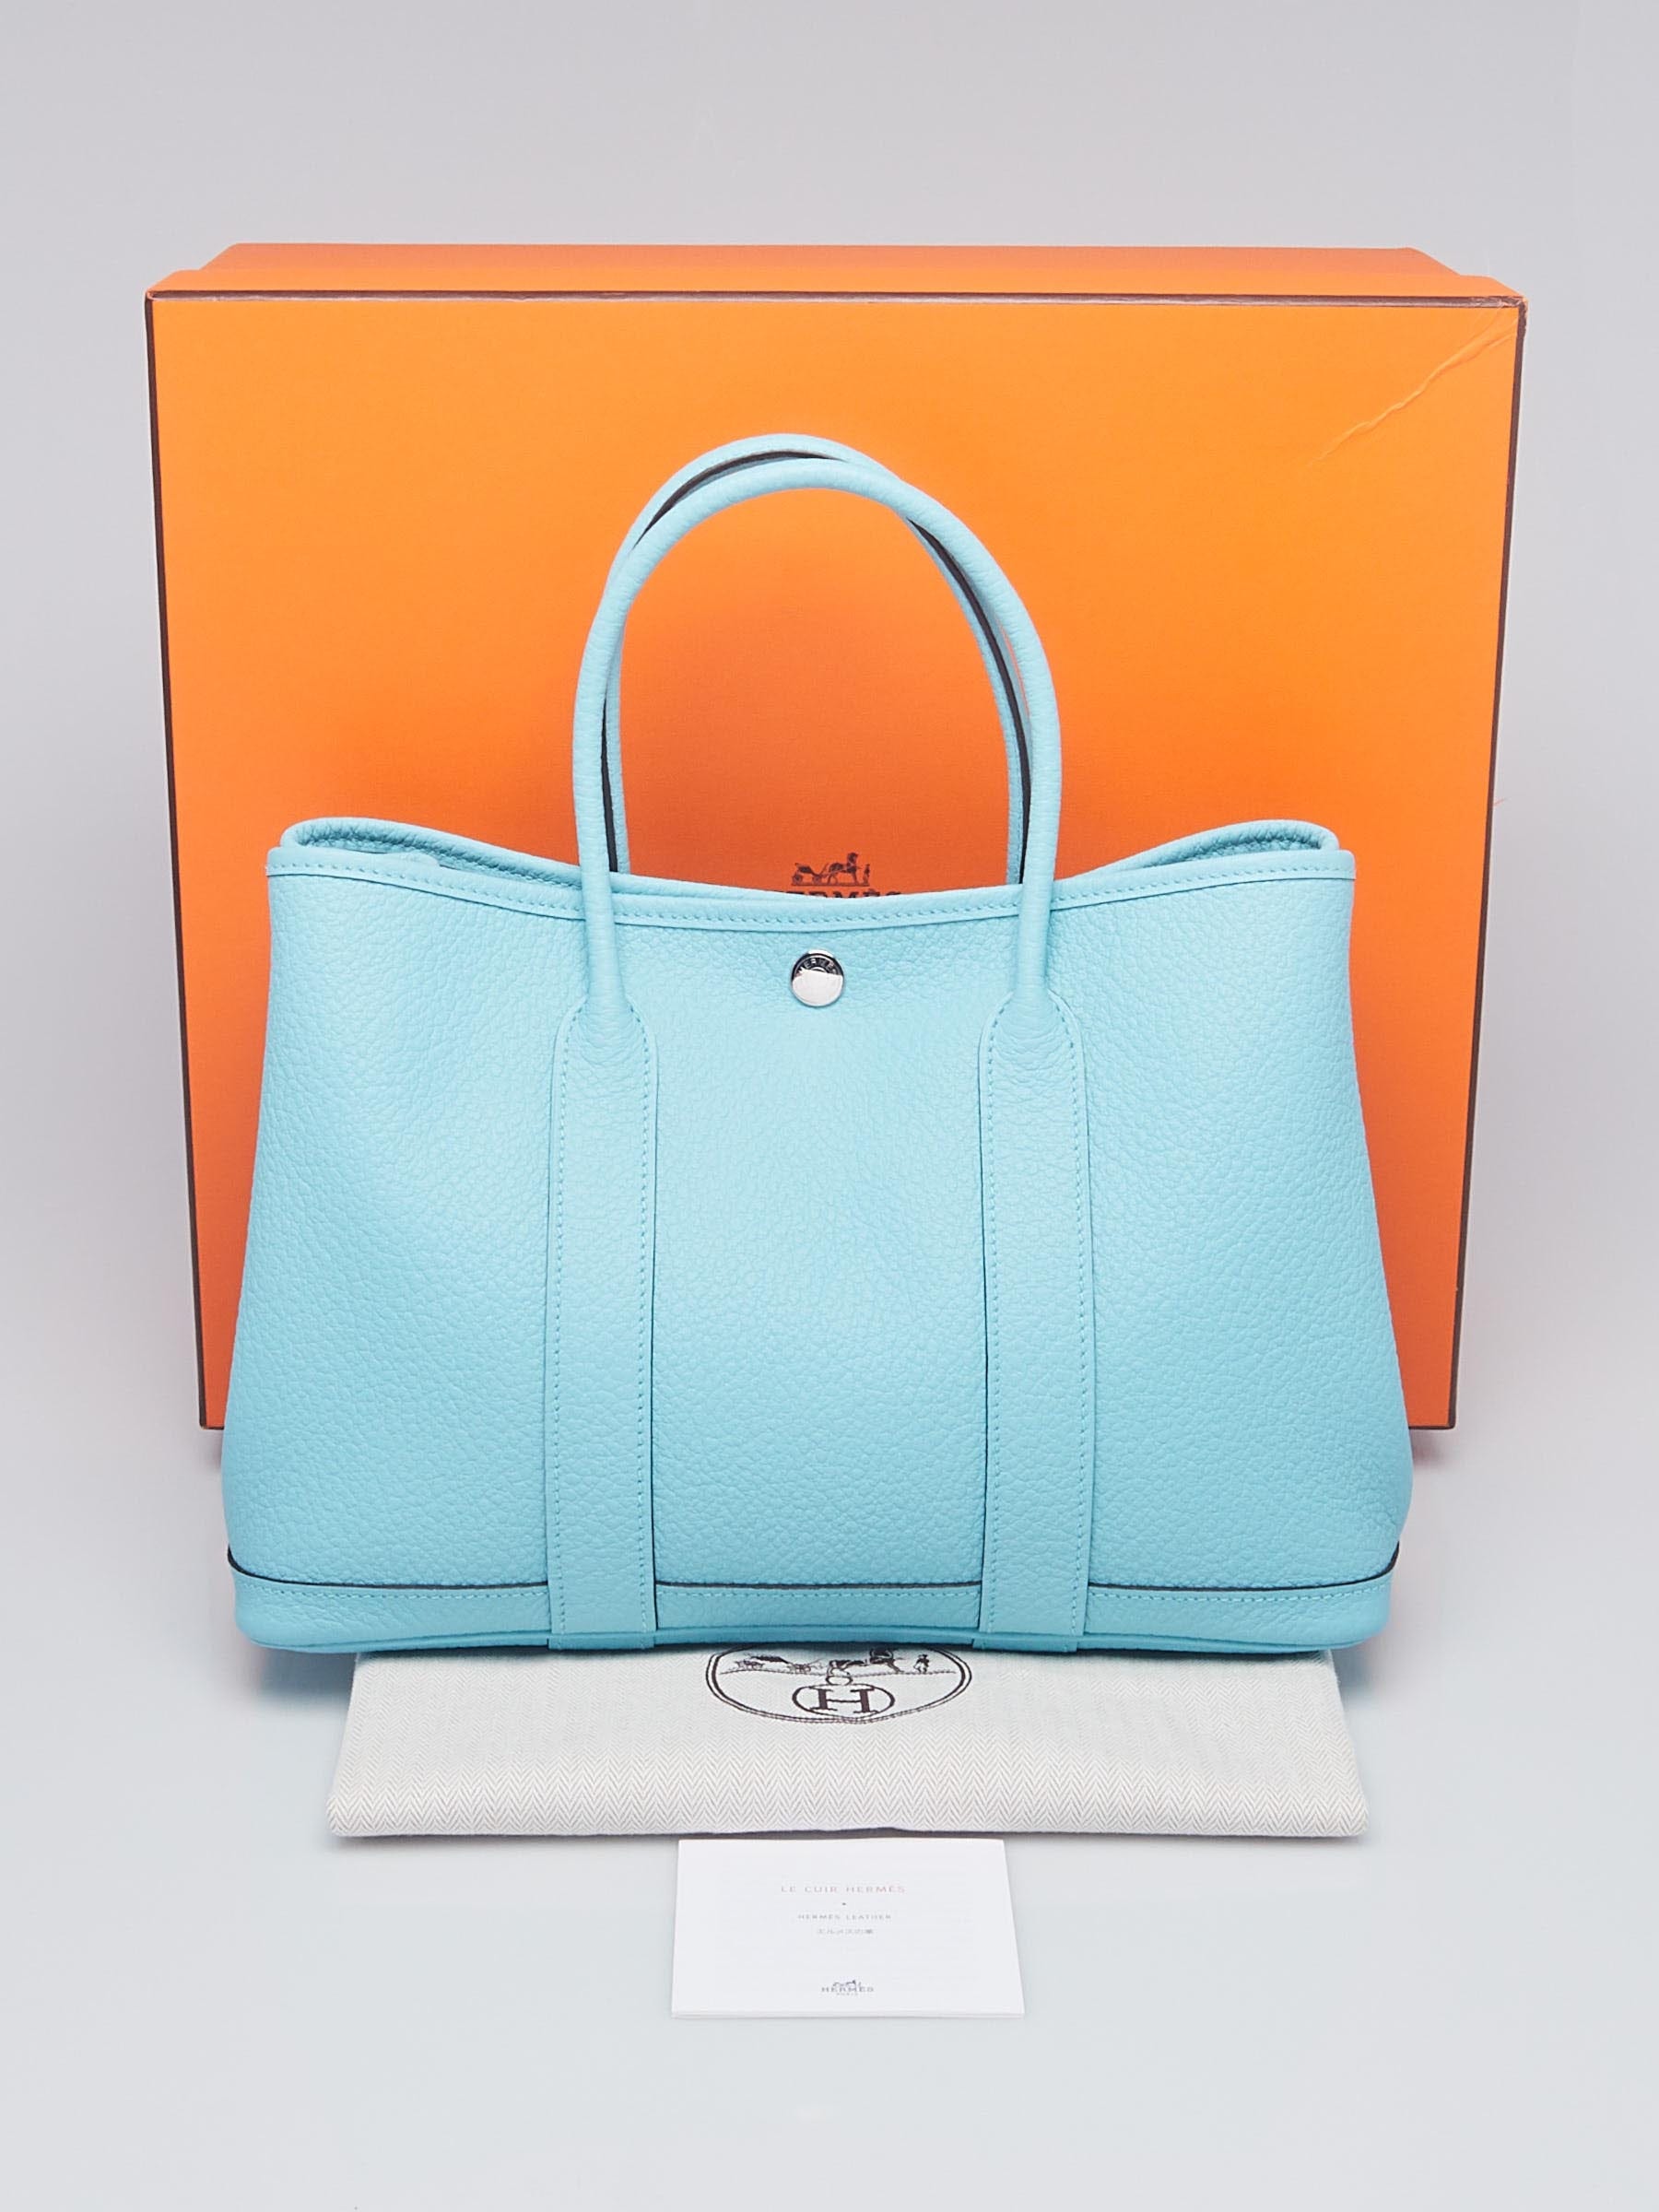 Luxury Promise - The Hermes Garden Party is the perfect everyday